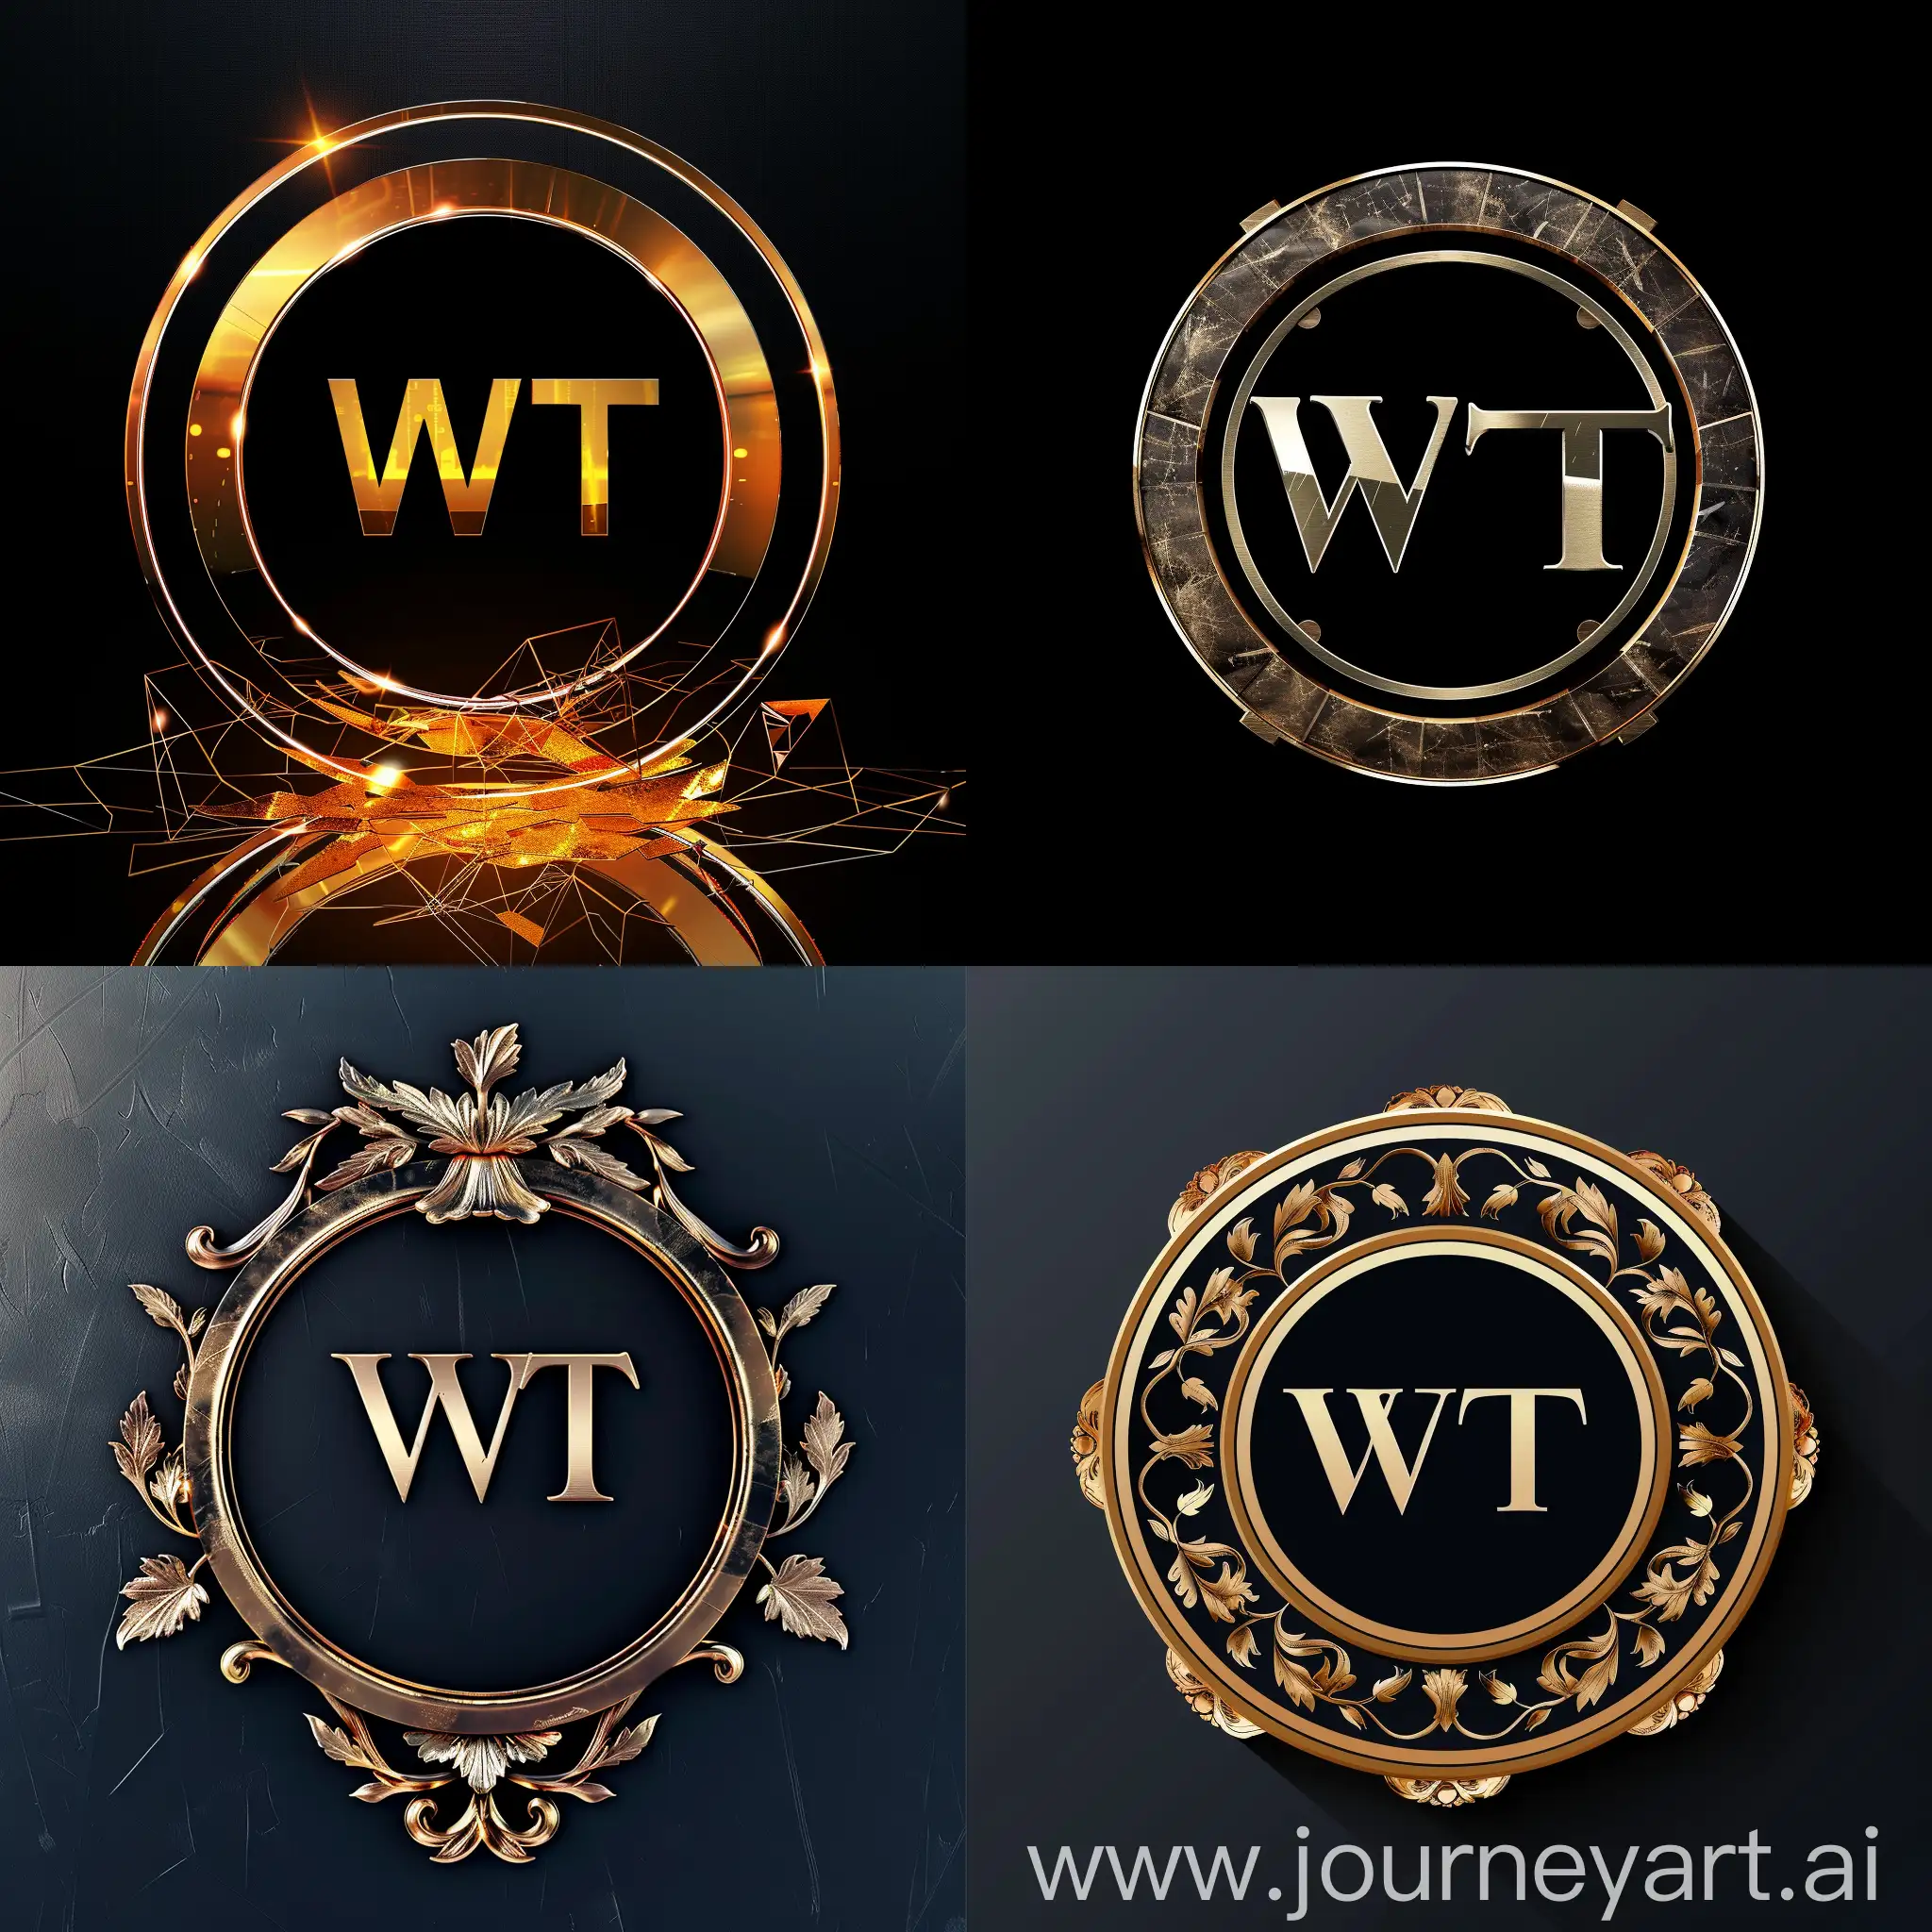 A circular logo texted "WT", entertainments styled background,  classic, low brightness background 